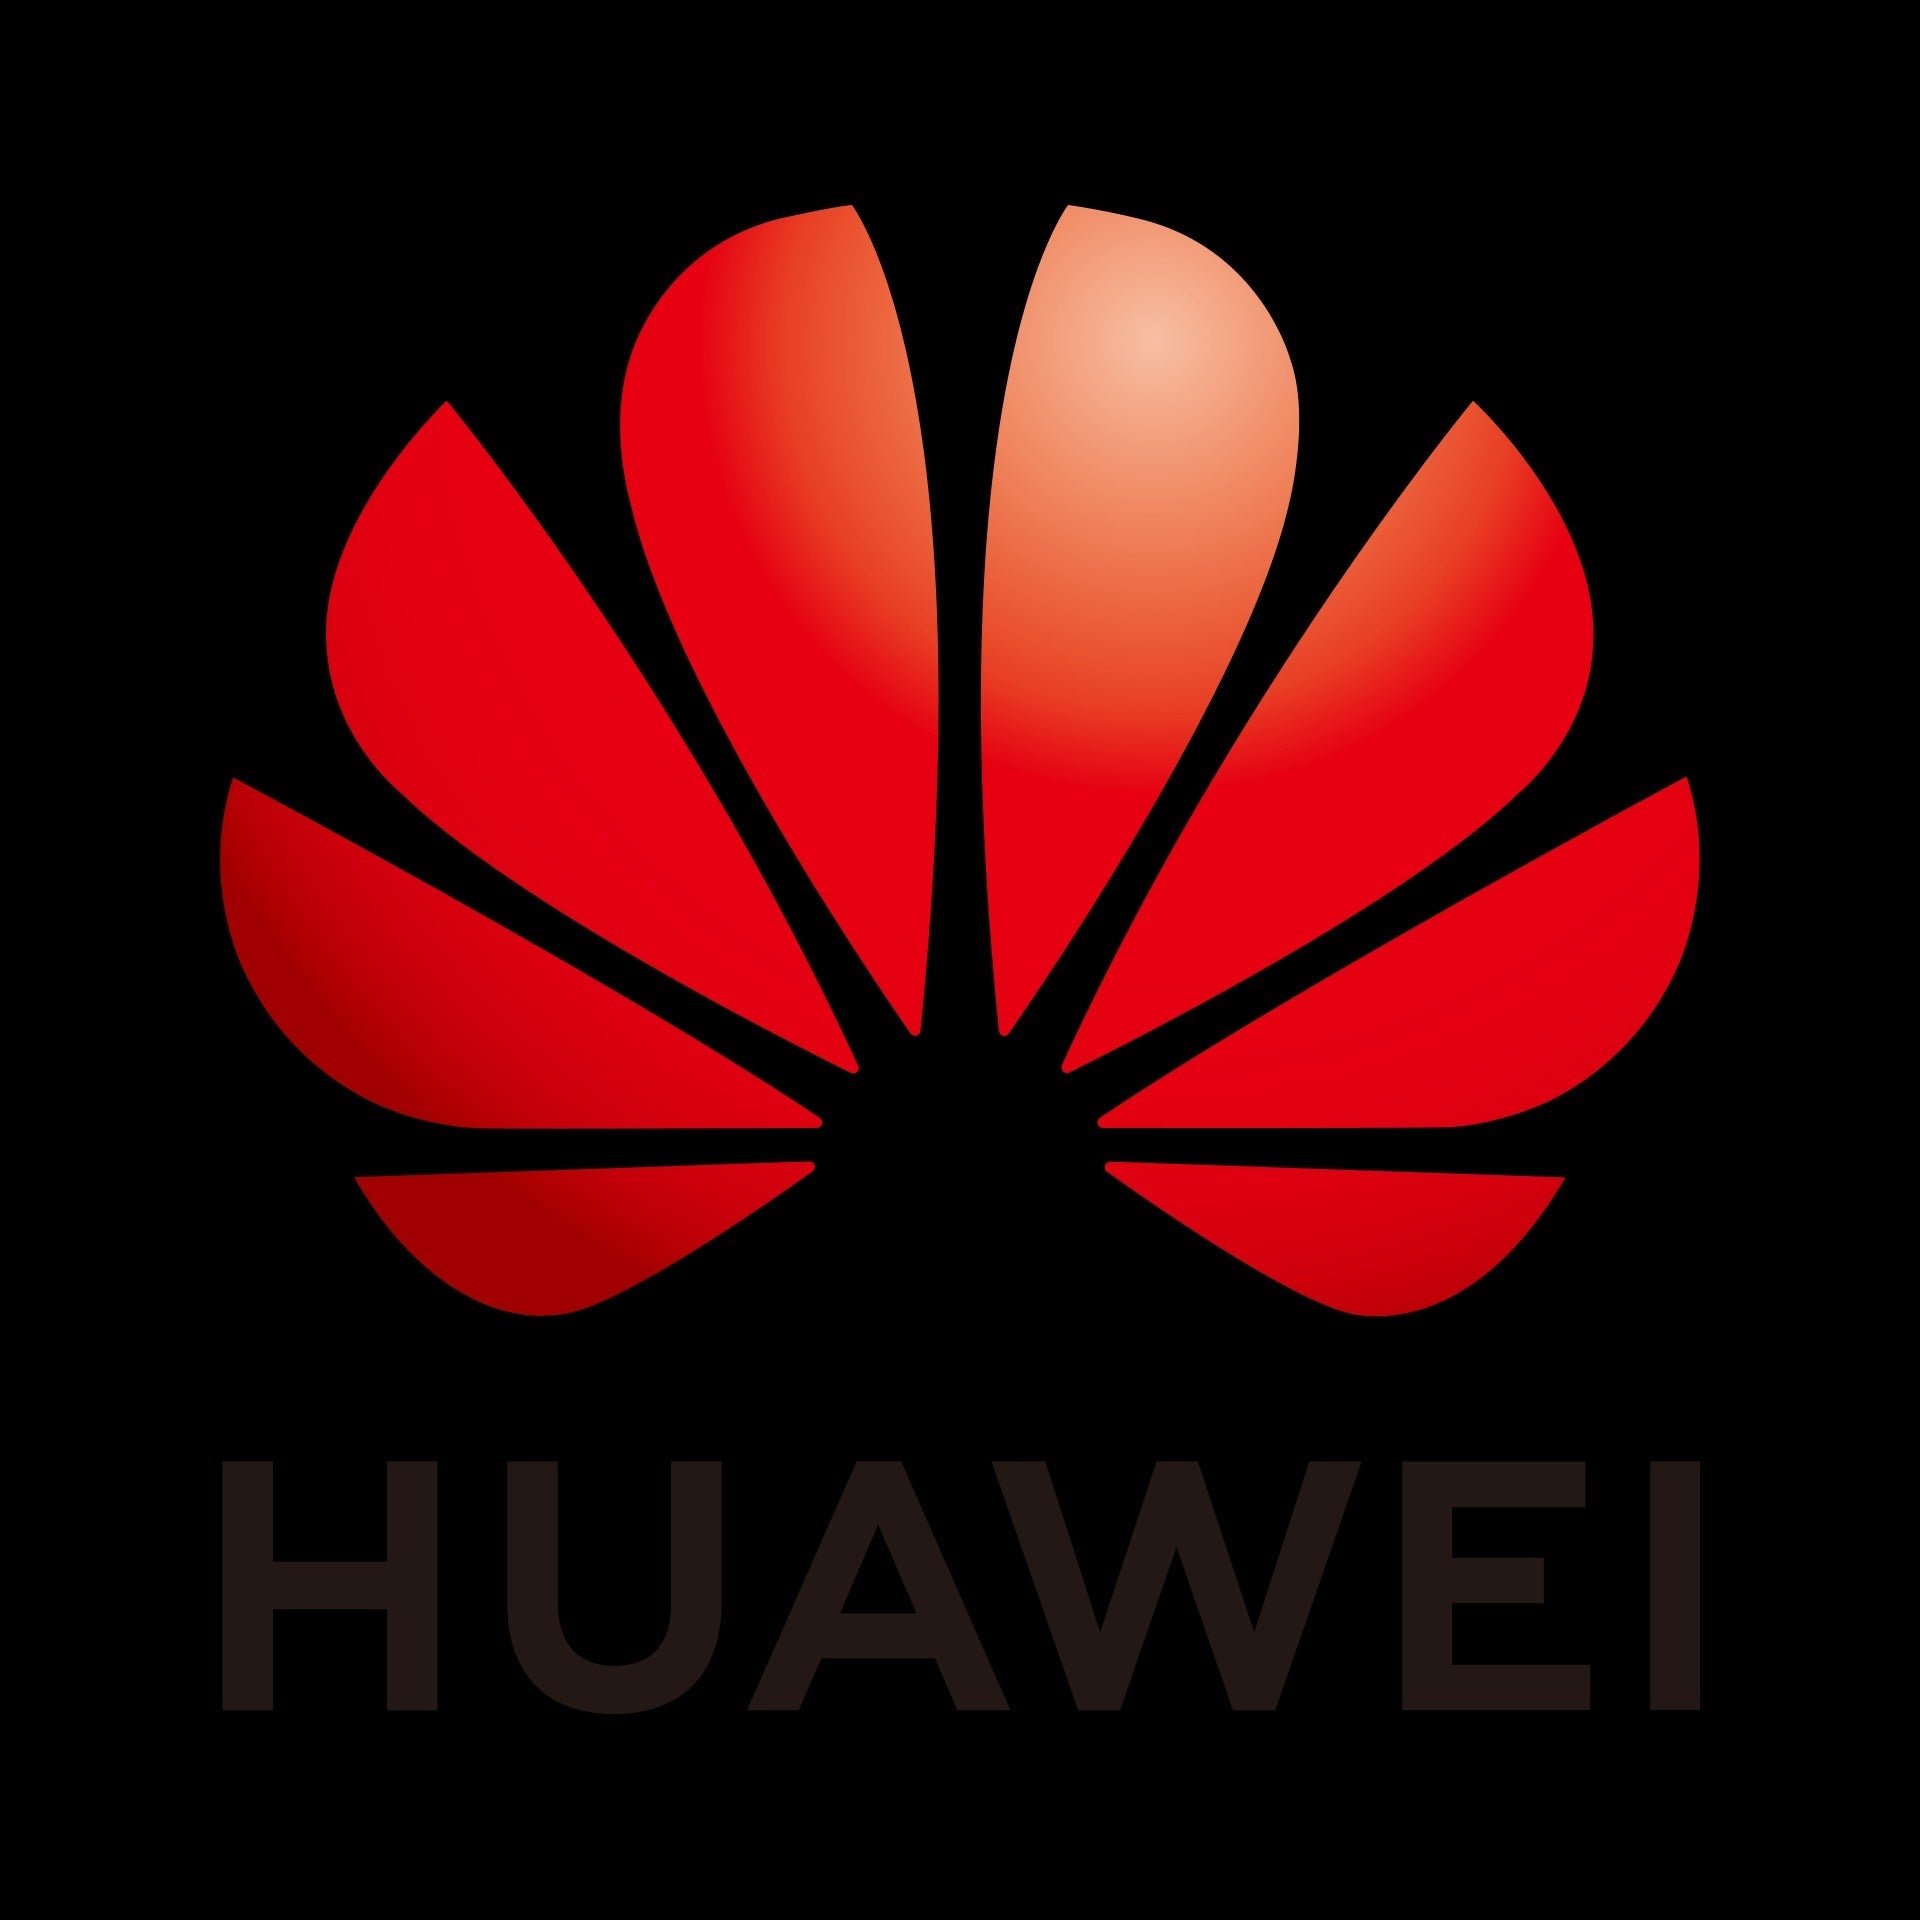 HUAWEI, Huawei Brand Smart Gadgets and Accessories